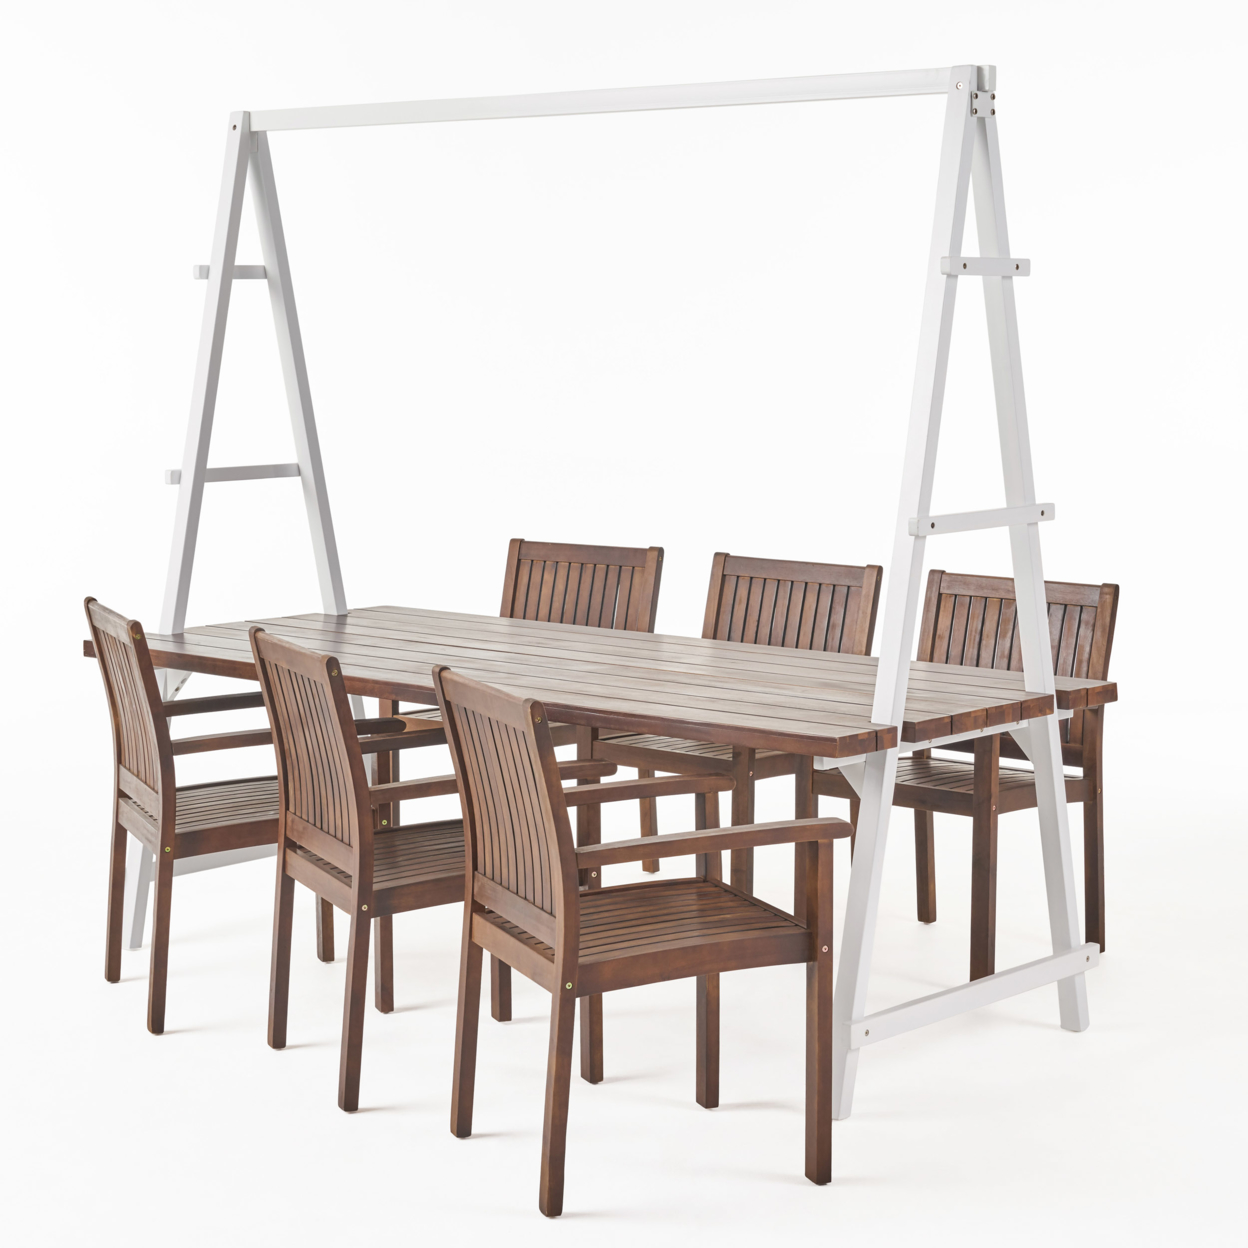 Chloe Outdoor 6 Seater Acacia Wood And Iron Planter Dining Set - Dark Brown, White